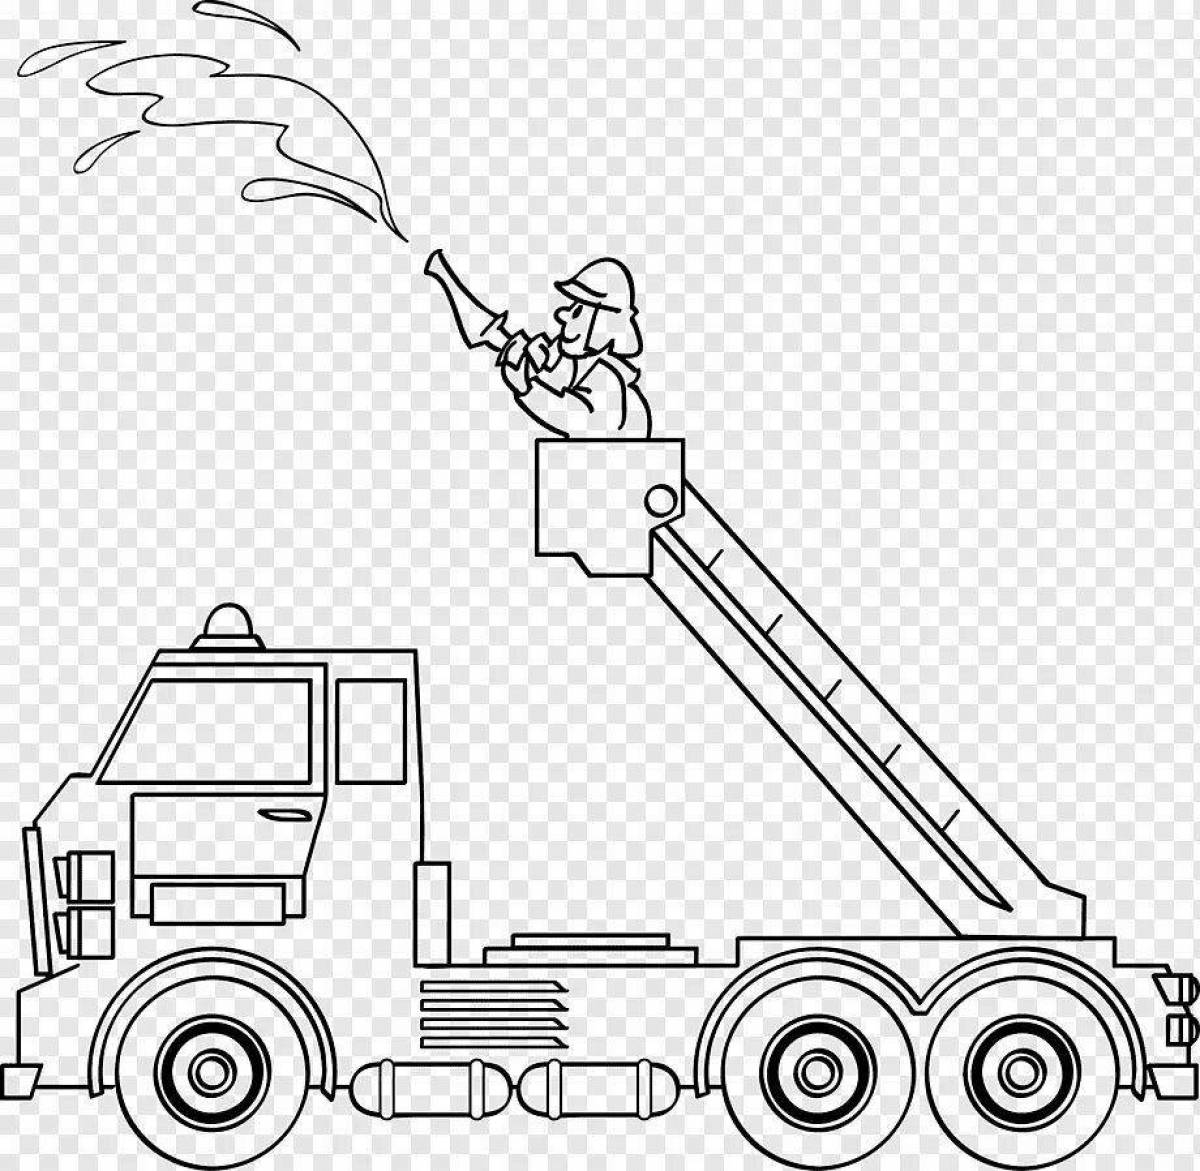 Exciting aerial platform coloring page